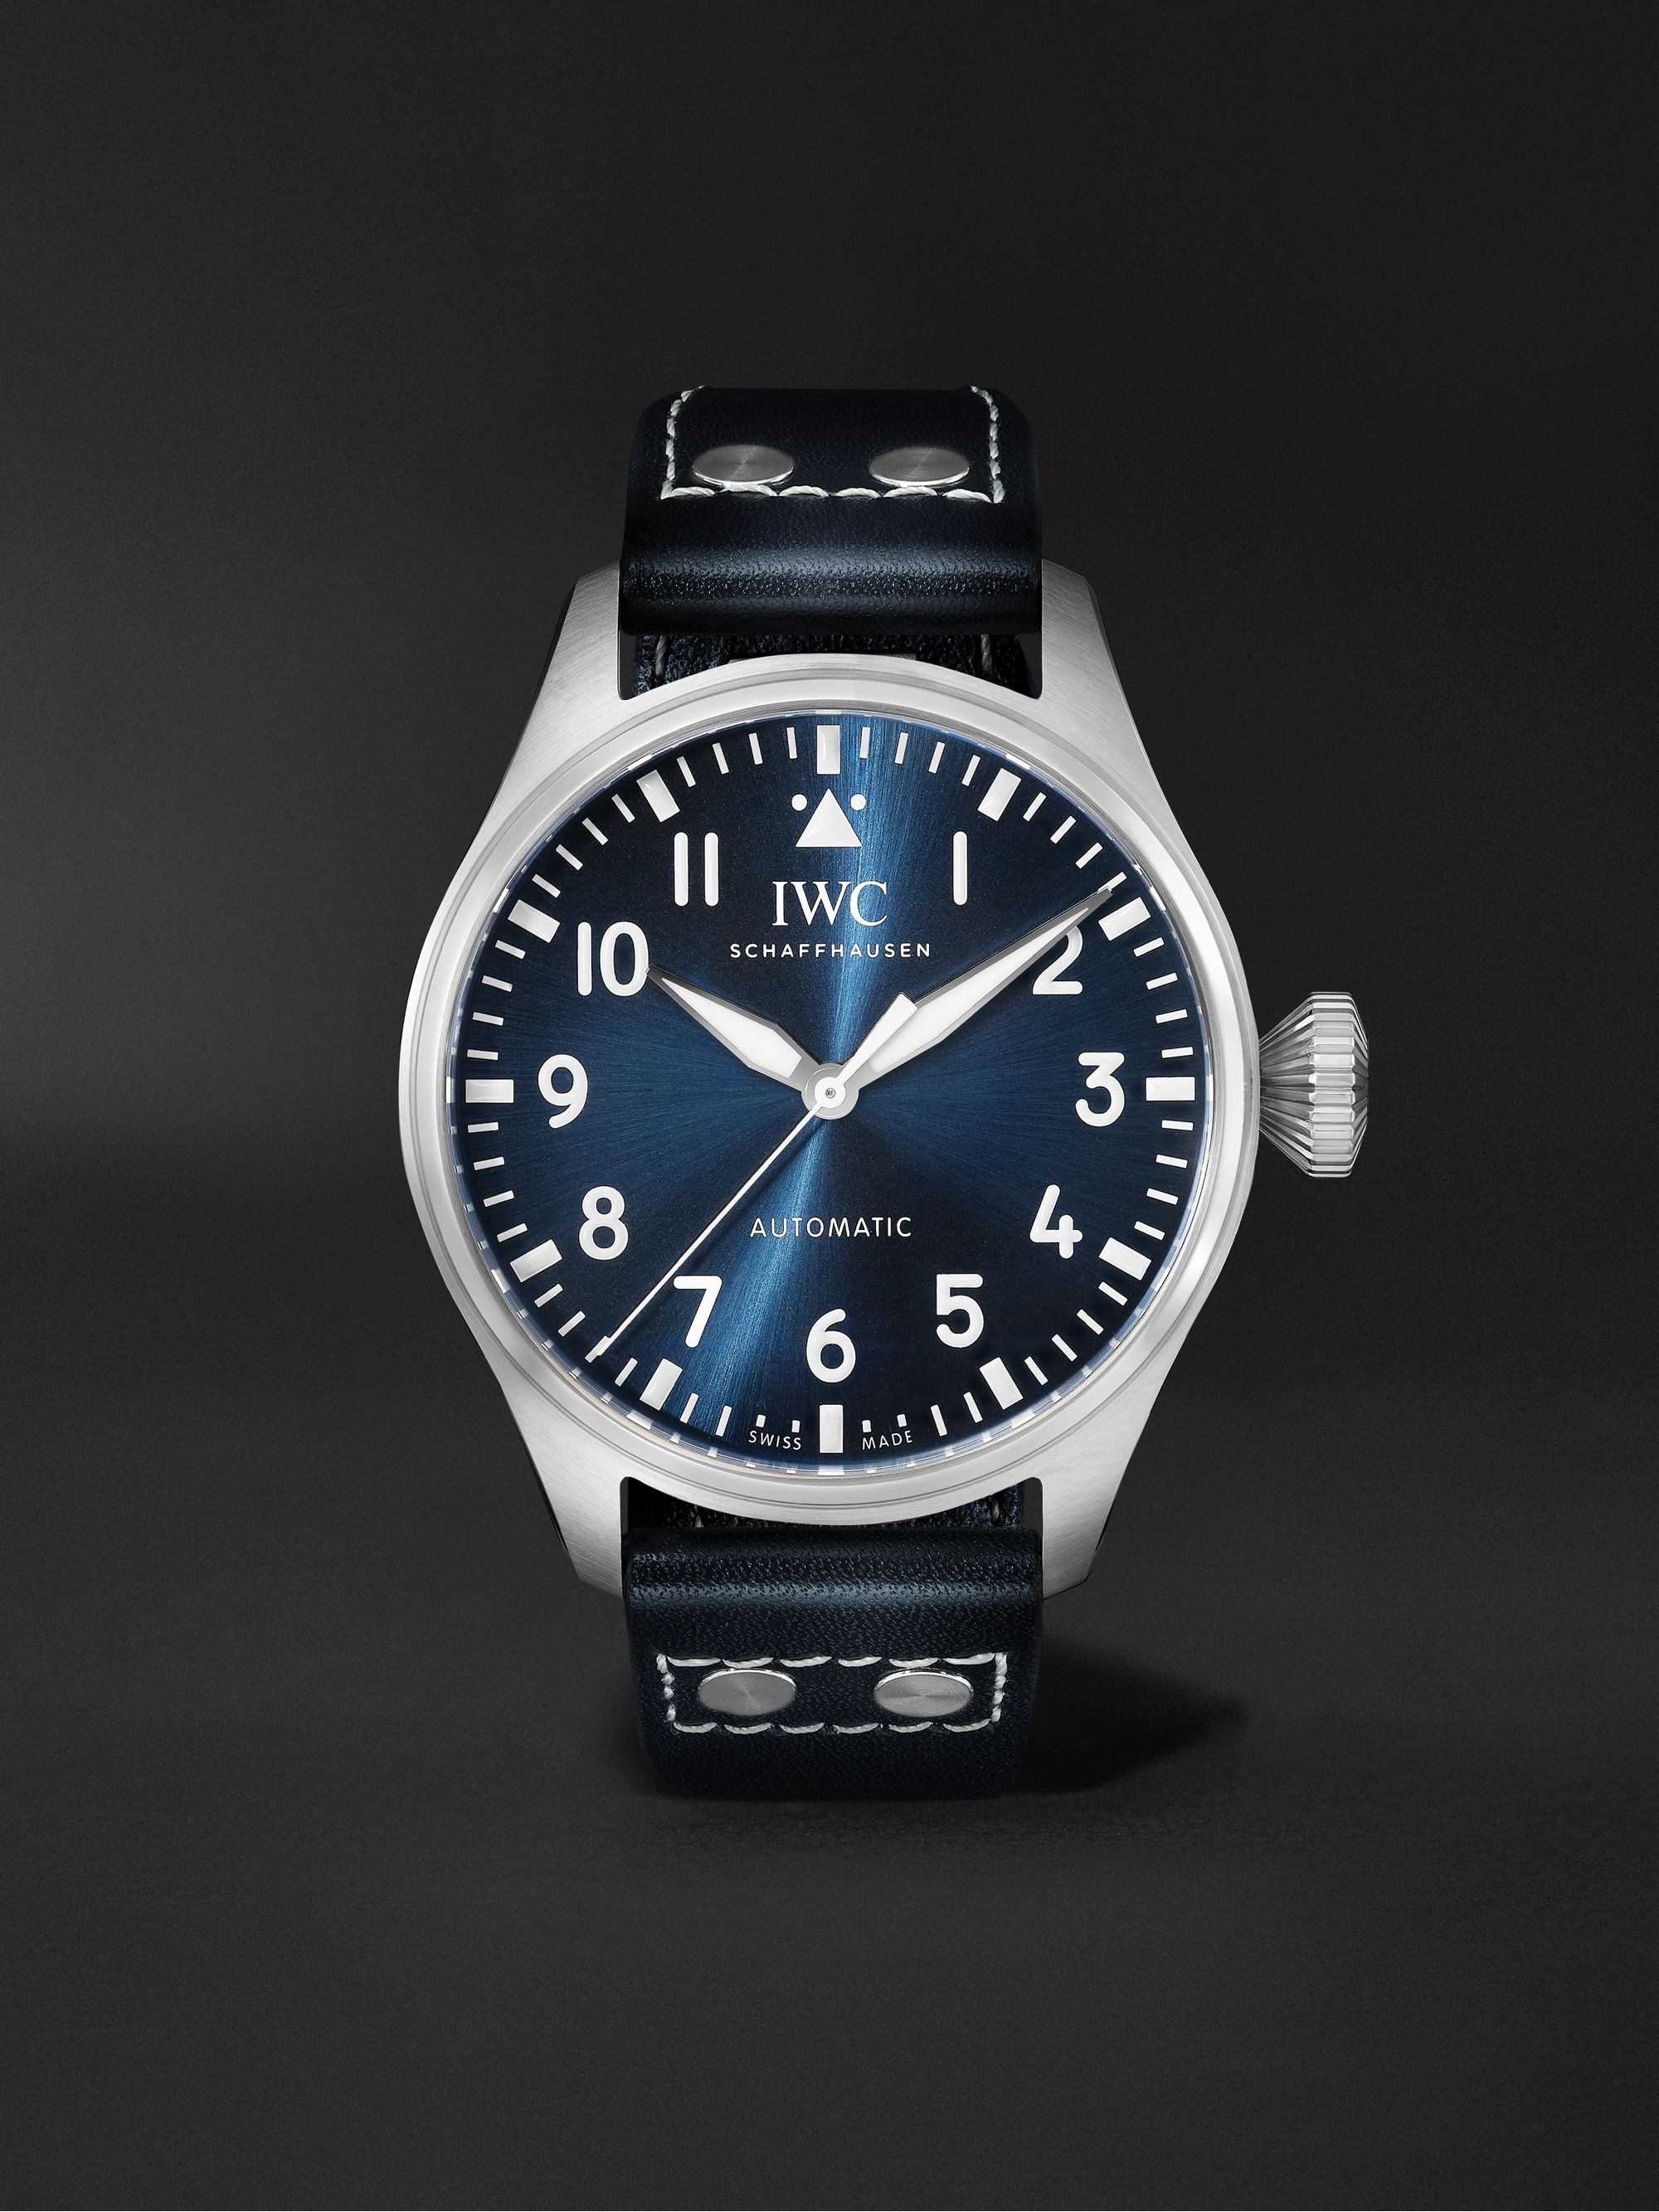 IWC SCHAFFHAUSEN Big Pilot's Automatic 43mm Stainless Steel and Leather Watch, Ref. No. IW329303